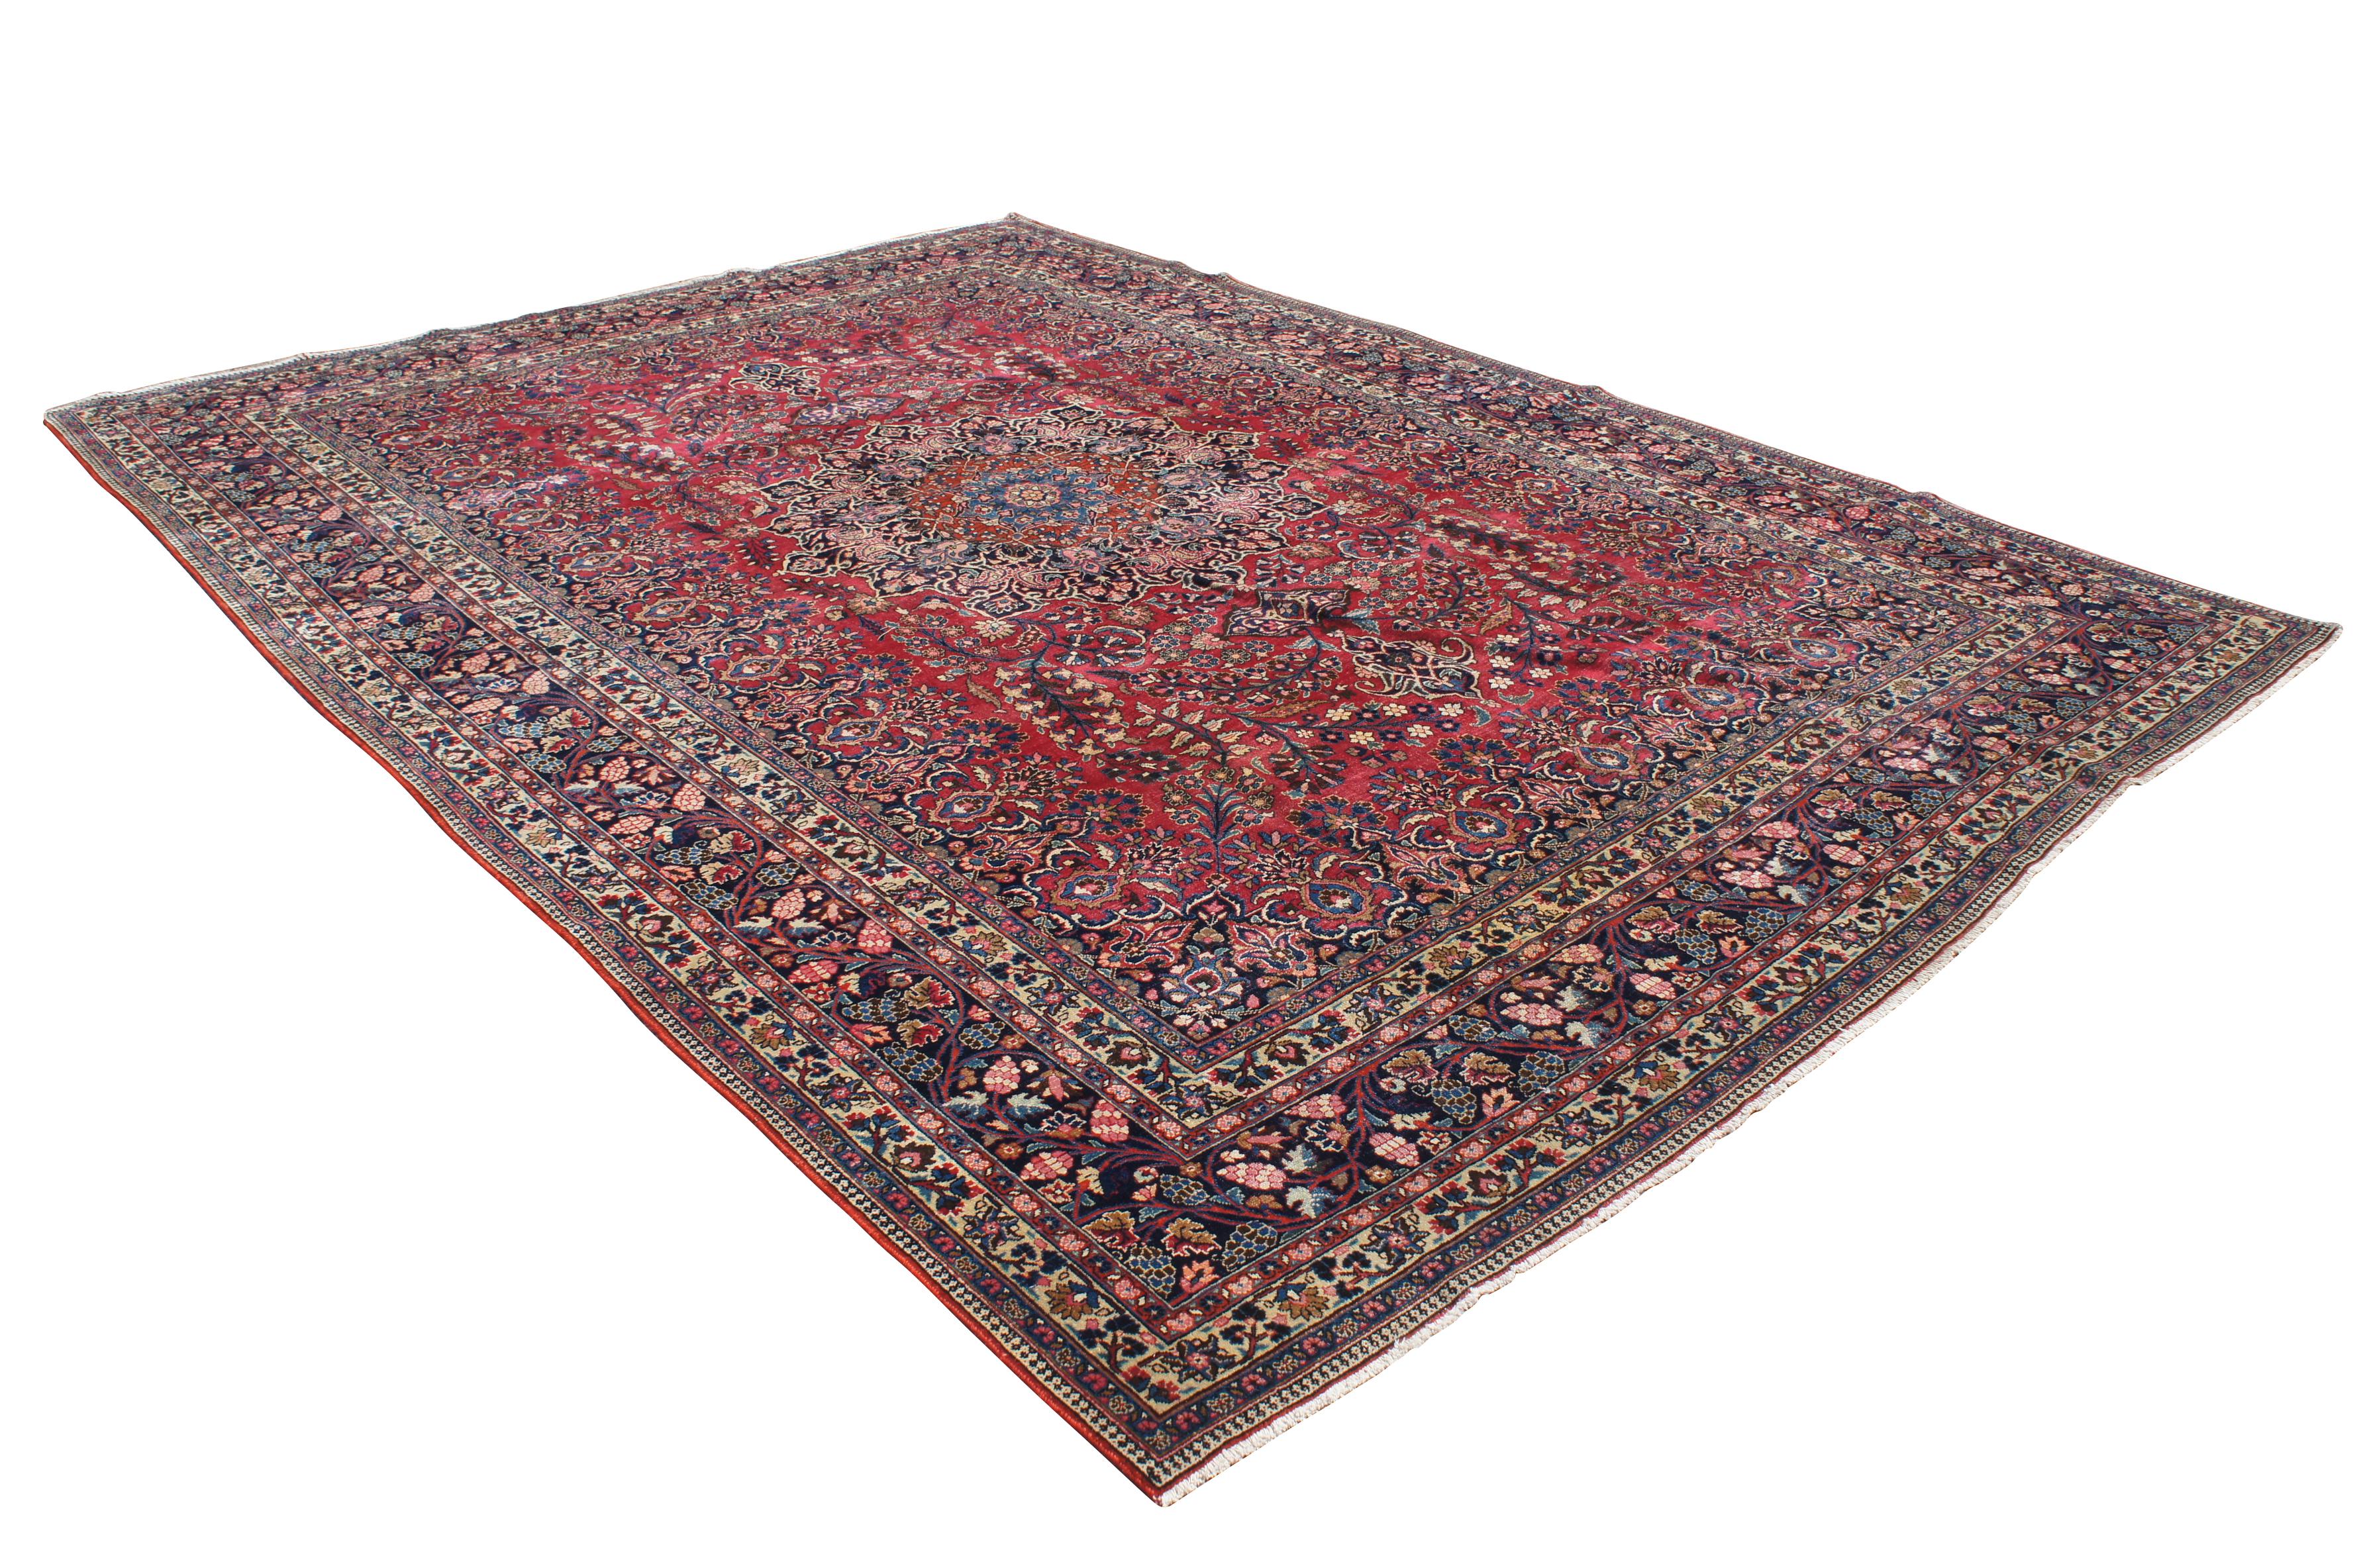 Semi Antique Hand Knotted Persian Sarouk Red Floral Medallion Area Rug 10' x 14' In Good Condition For Sale In Dayton, OH